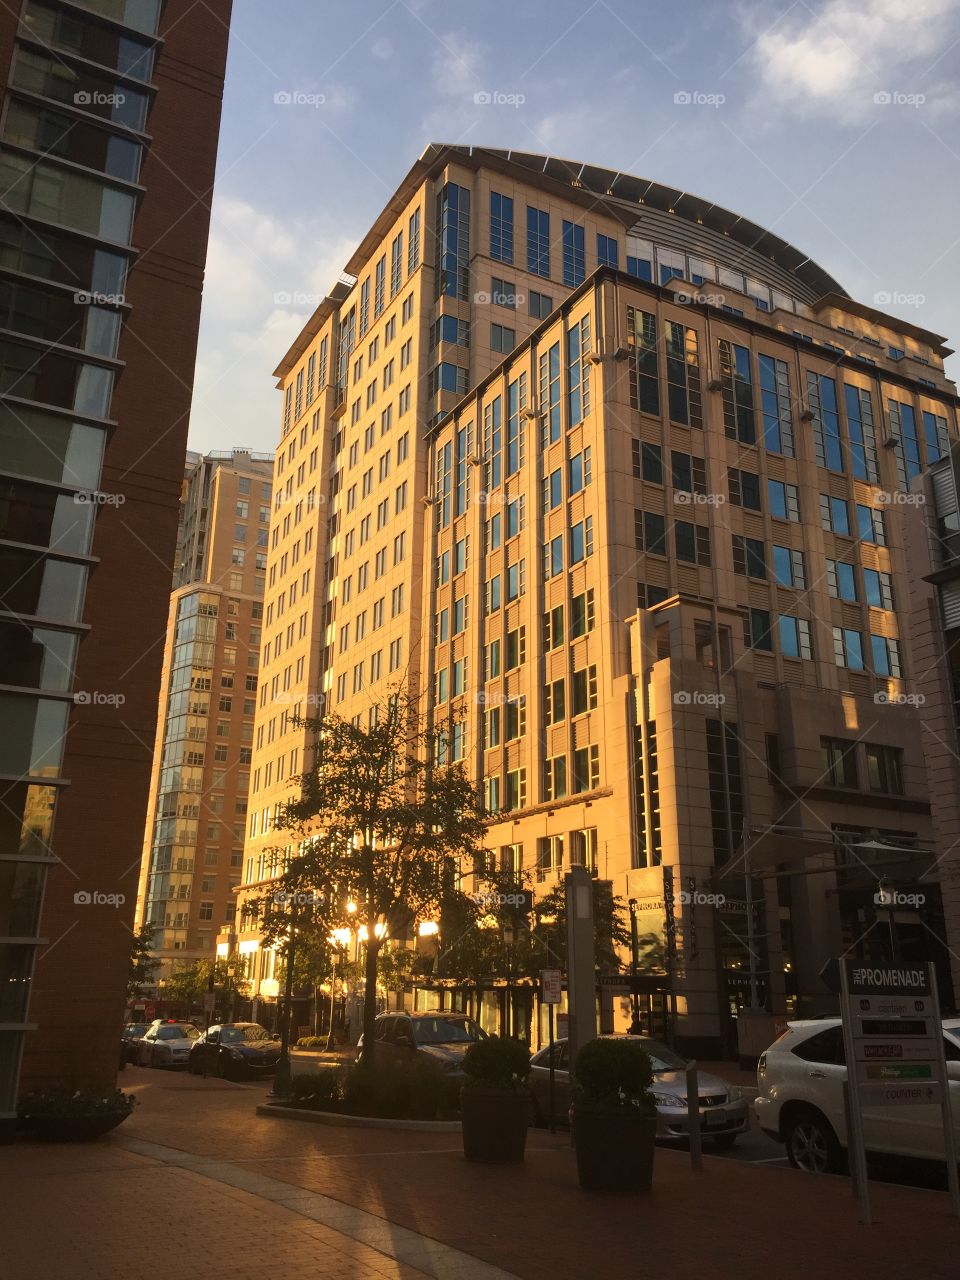 Reston Town Center at Sunset. A shot of Reston Town Center in Northern Virginia 